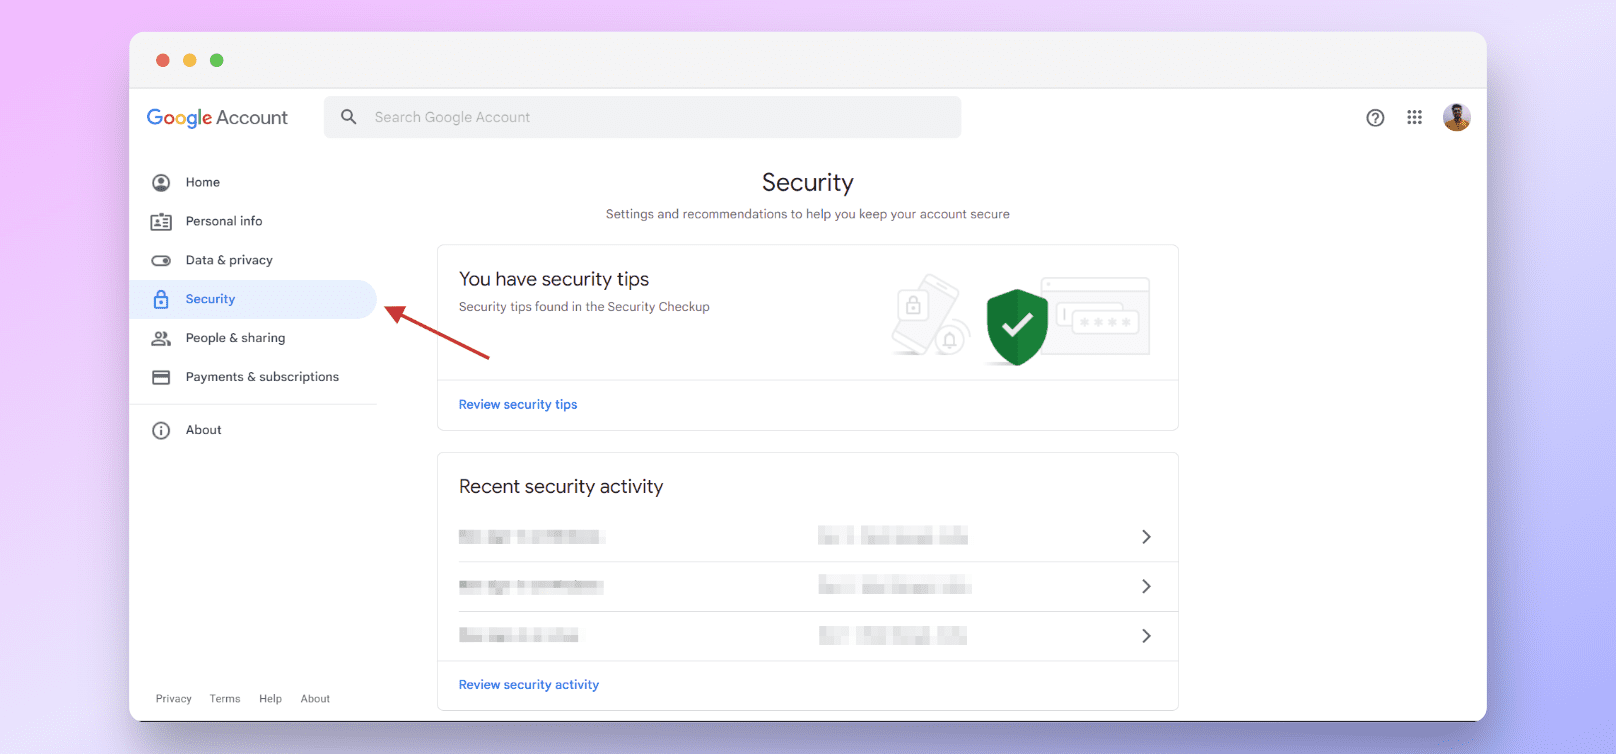 Click on the security option from the menu